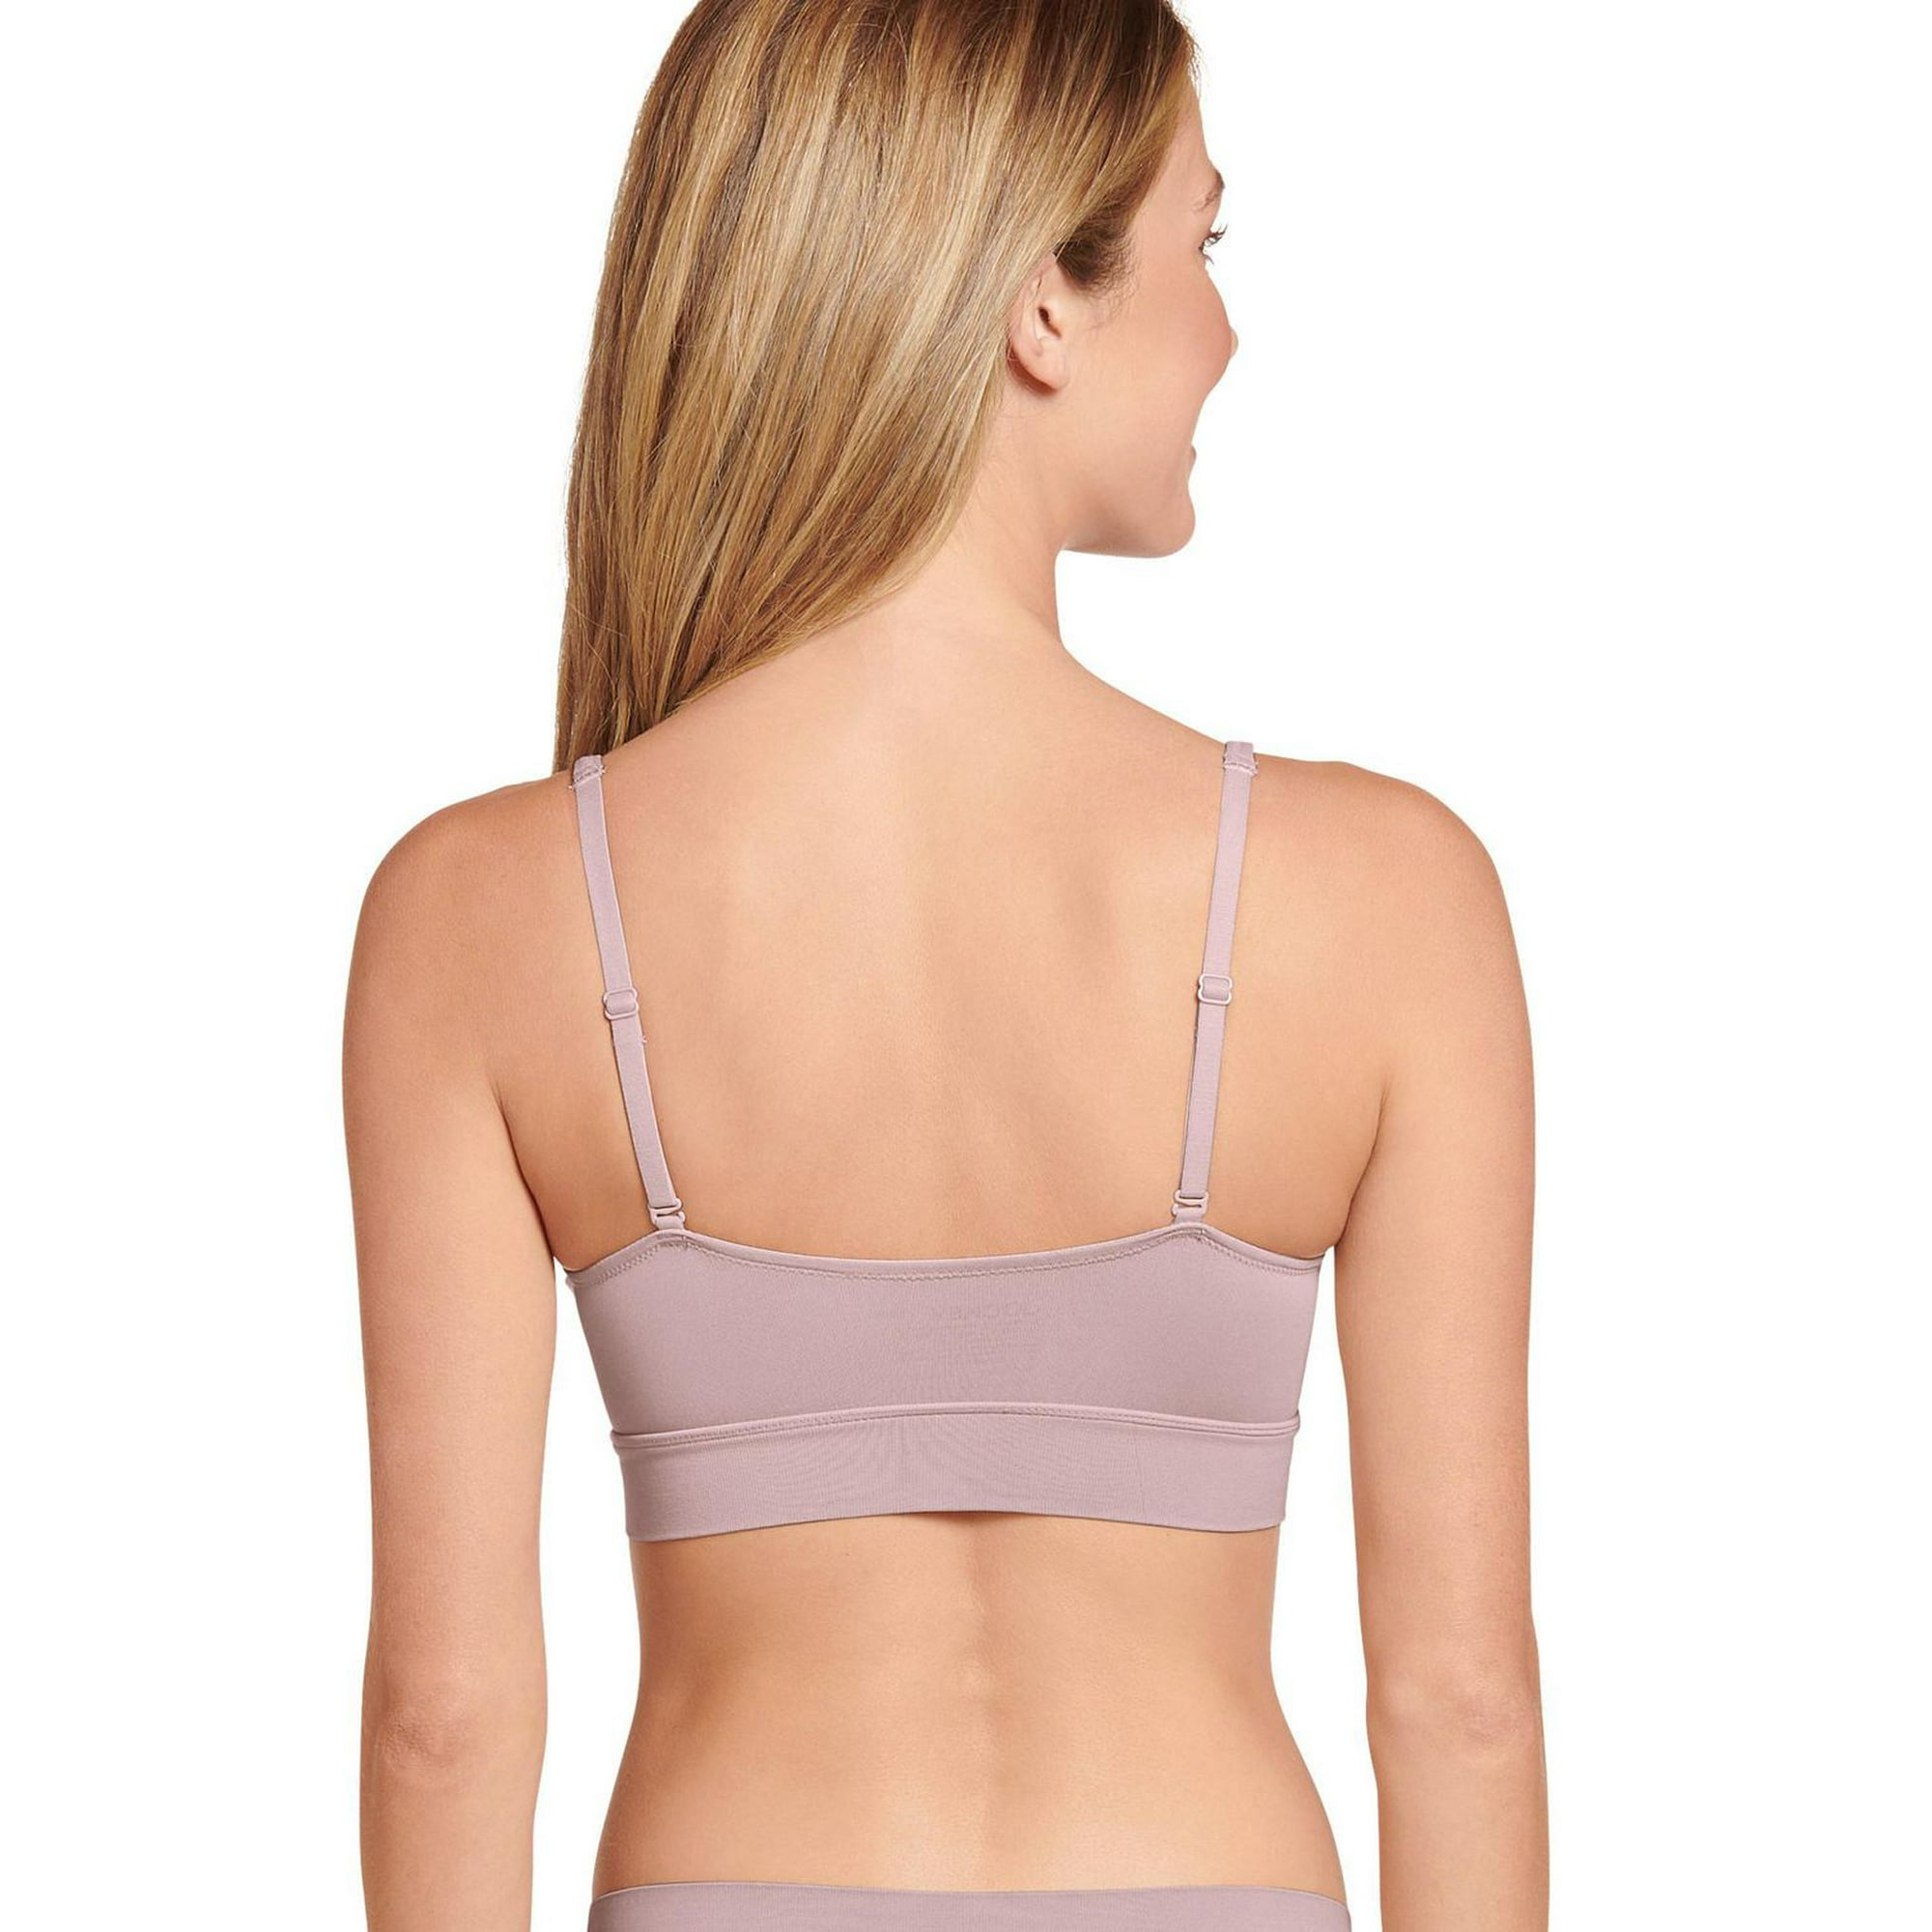 Grenier Extreme Comfort Cotton Soft Cup Bra - 8566 (30A, Natural